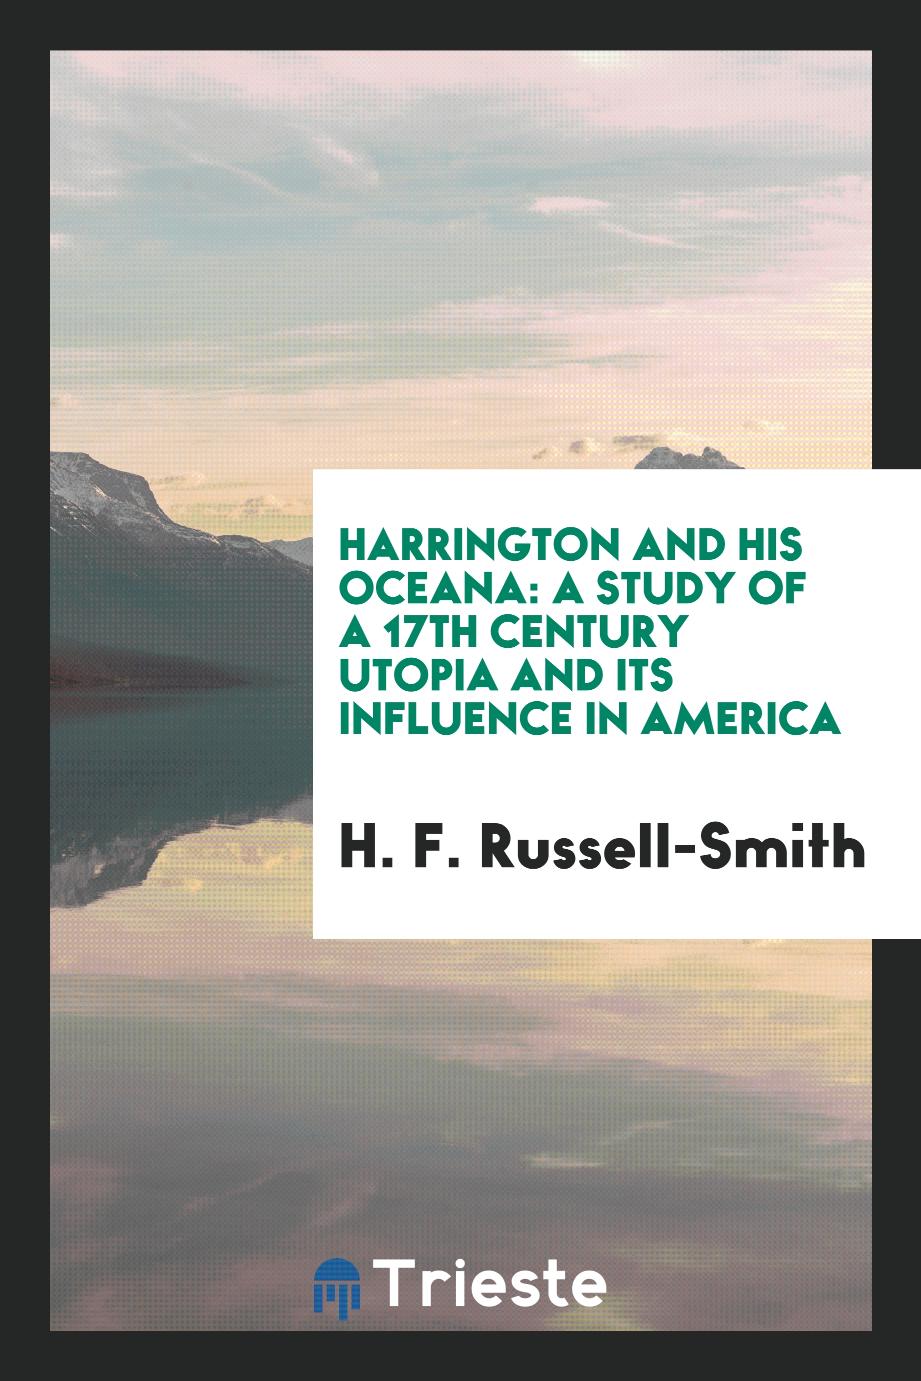 Harrington and His Oceana: A Study of a 17th Century Utopia and Its Influence in America